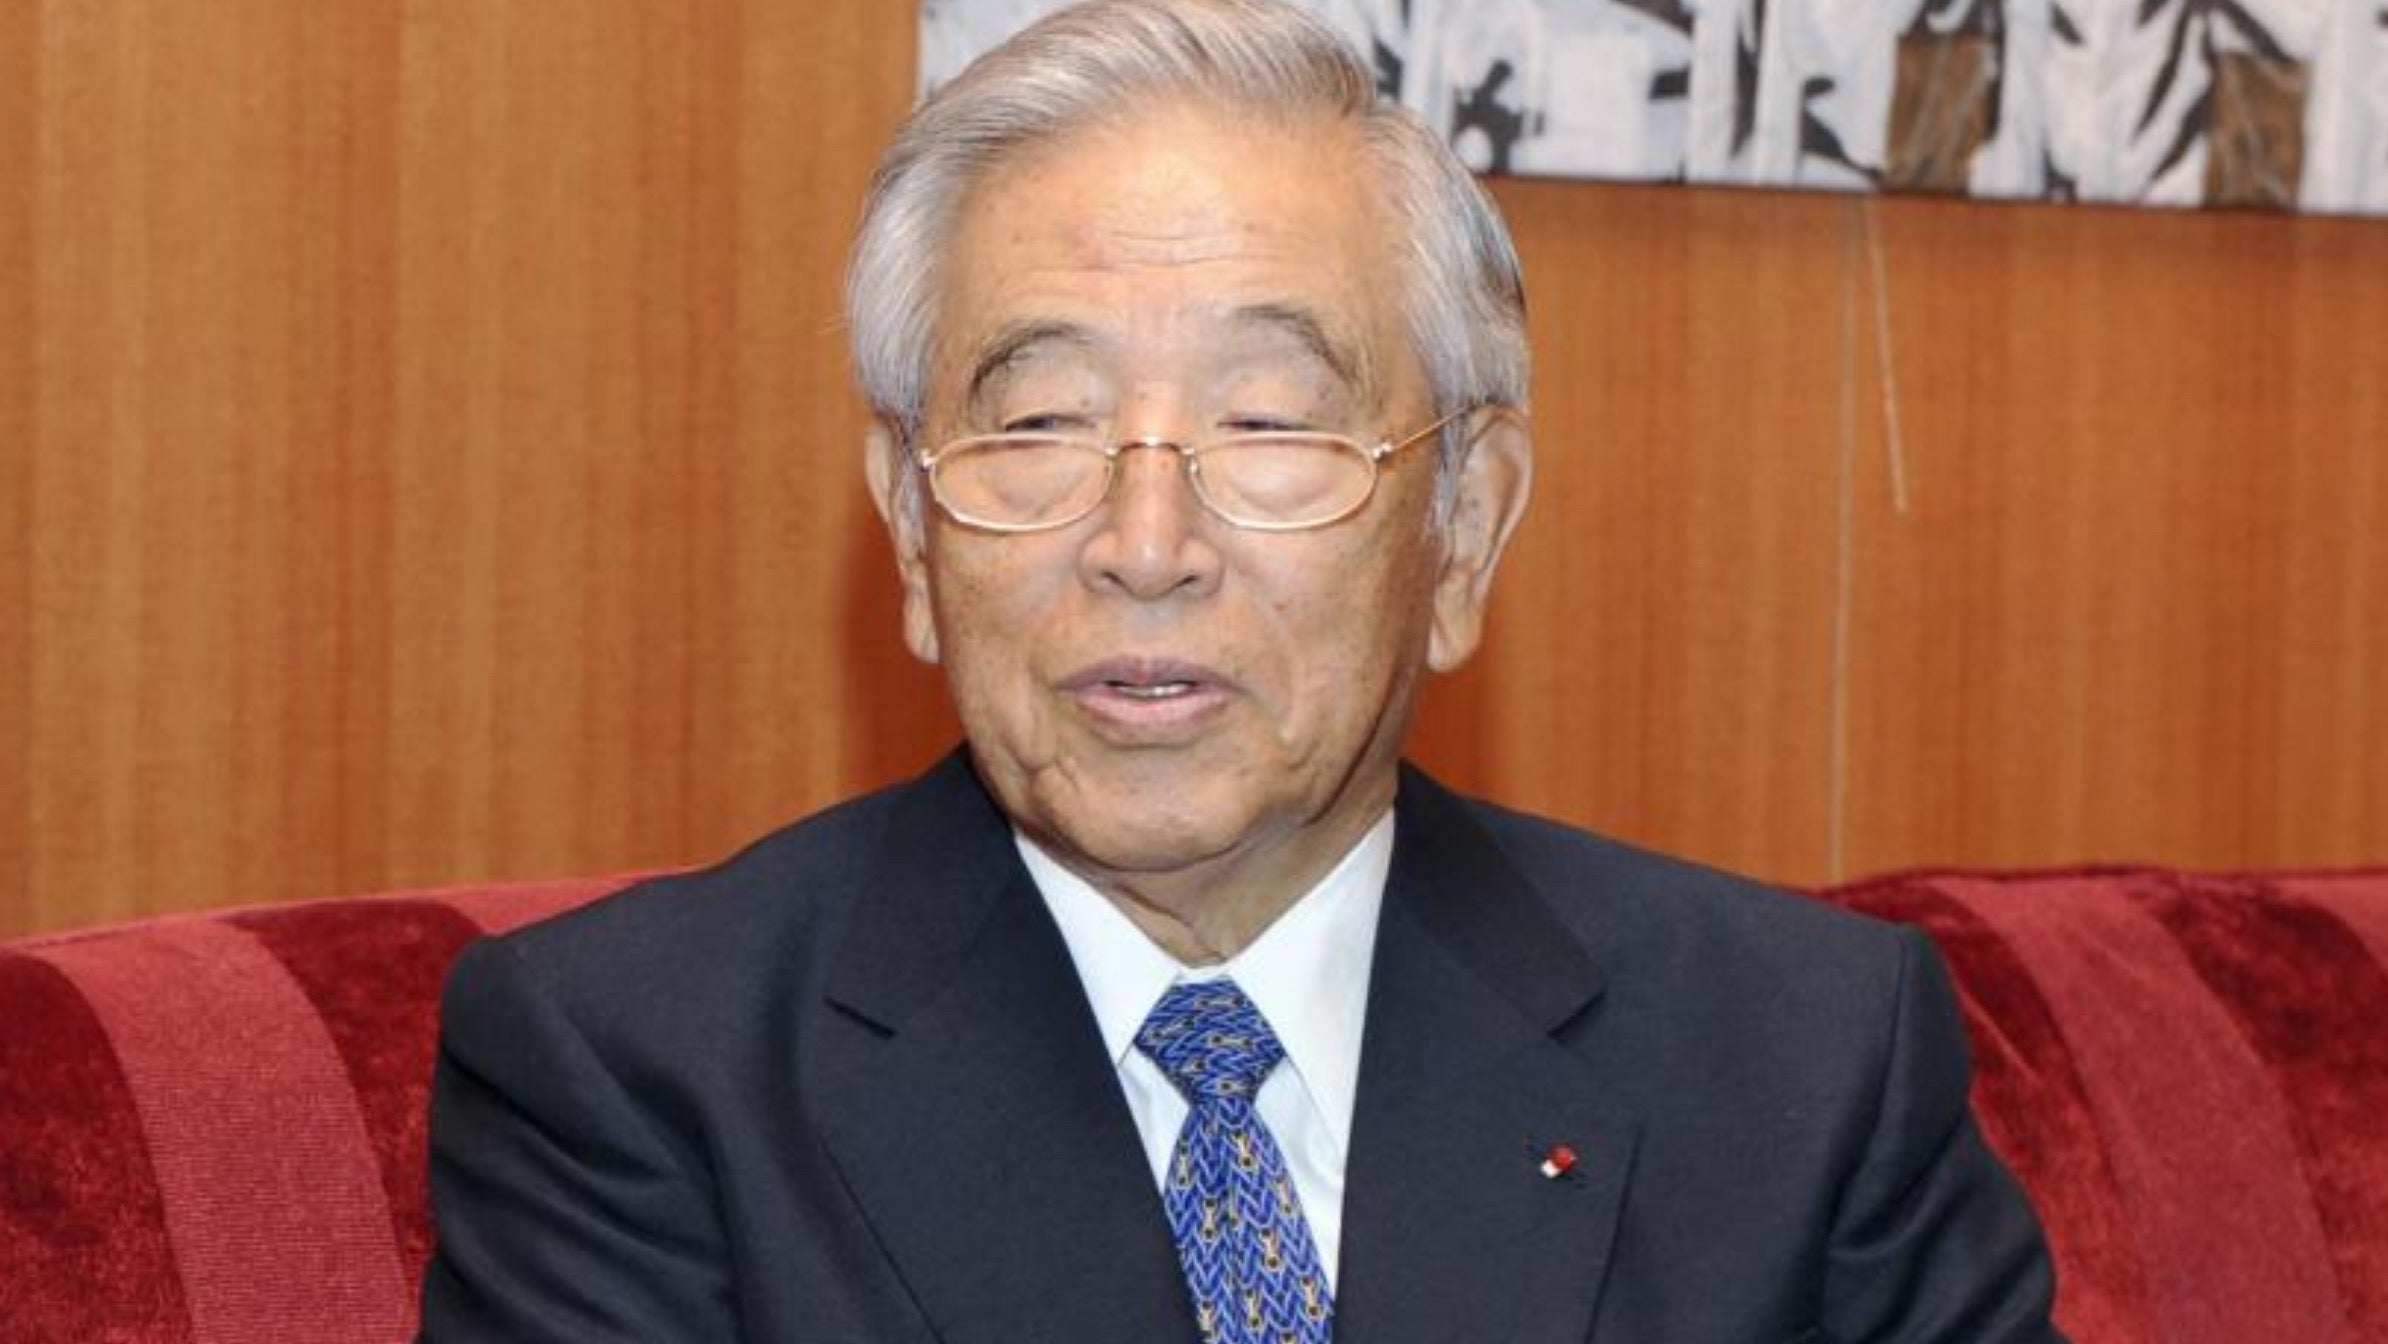 Death at 97 of Shoichiro Toyoda, the architect of Toyota’s globalization, Magnate Daily